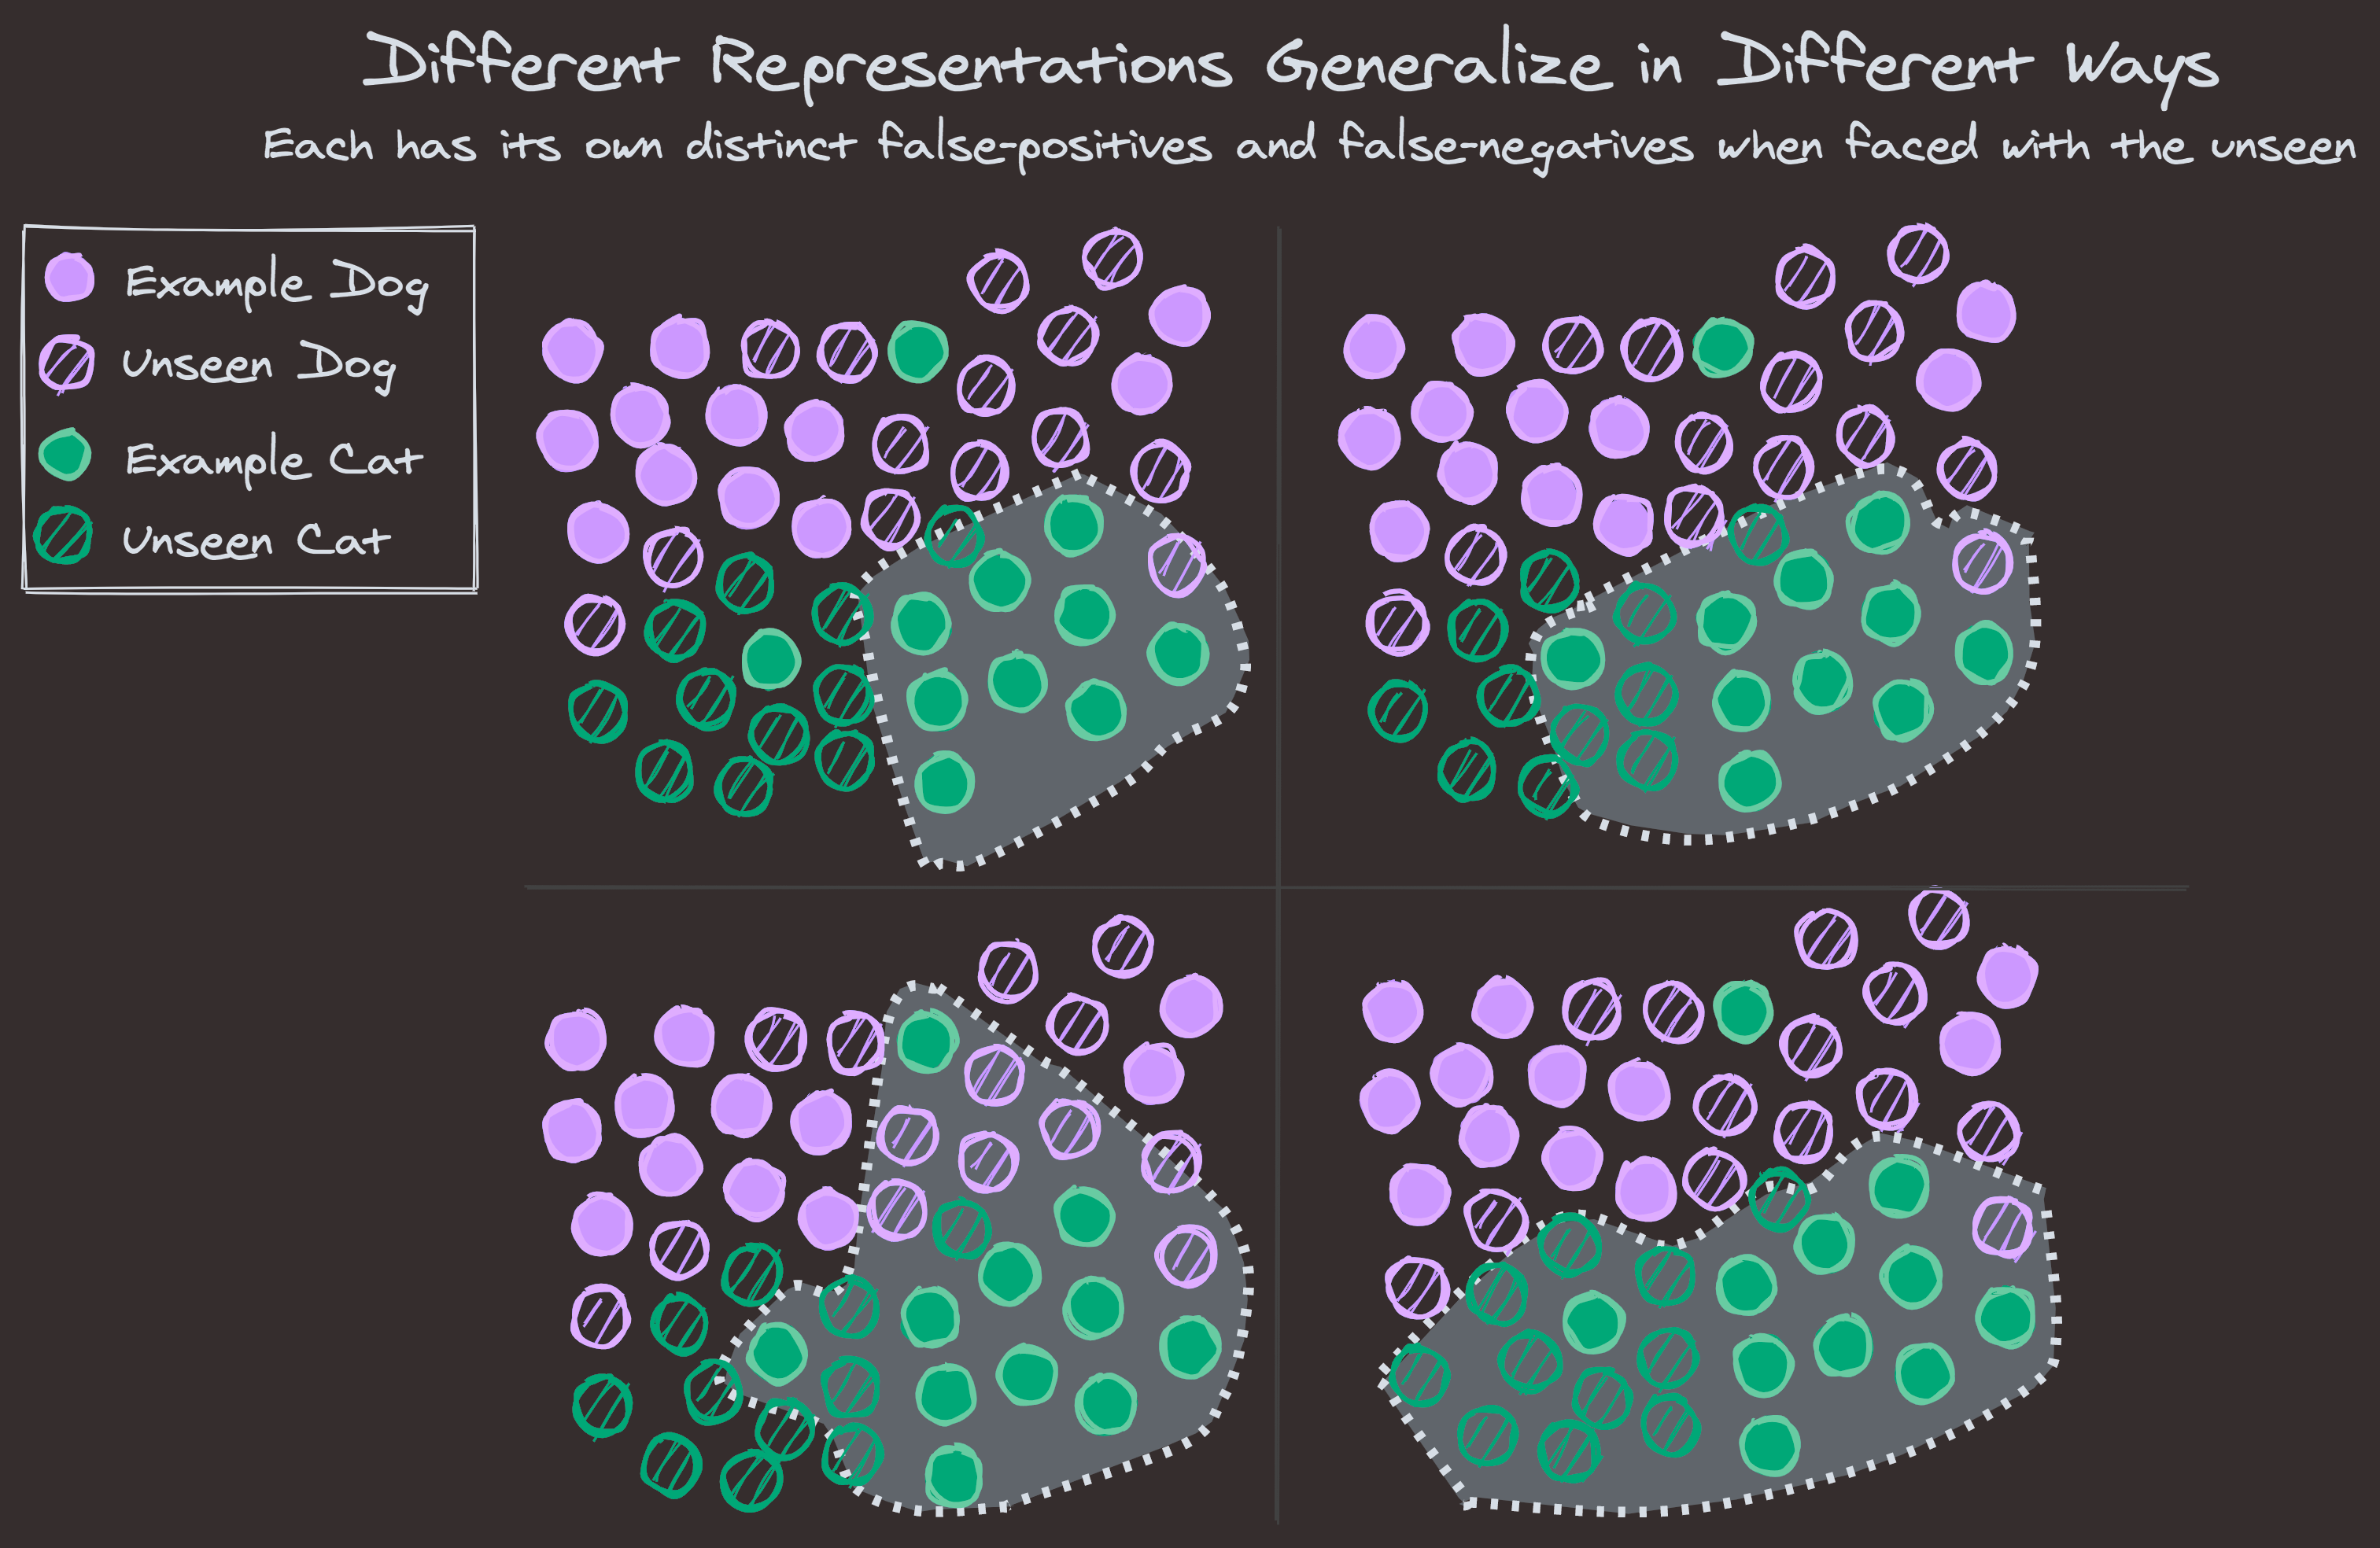 Different representations generalize in different ways. Each can have its own distinct false-positives and false-negatives. Each has its blindspots.